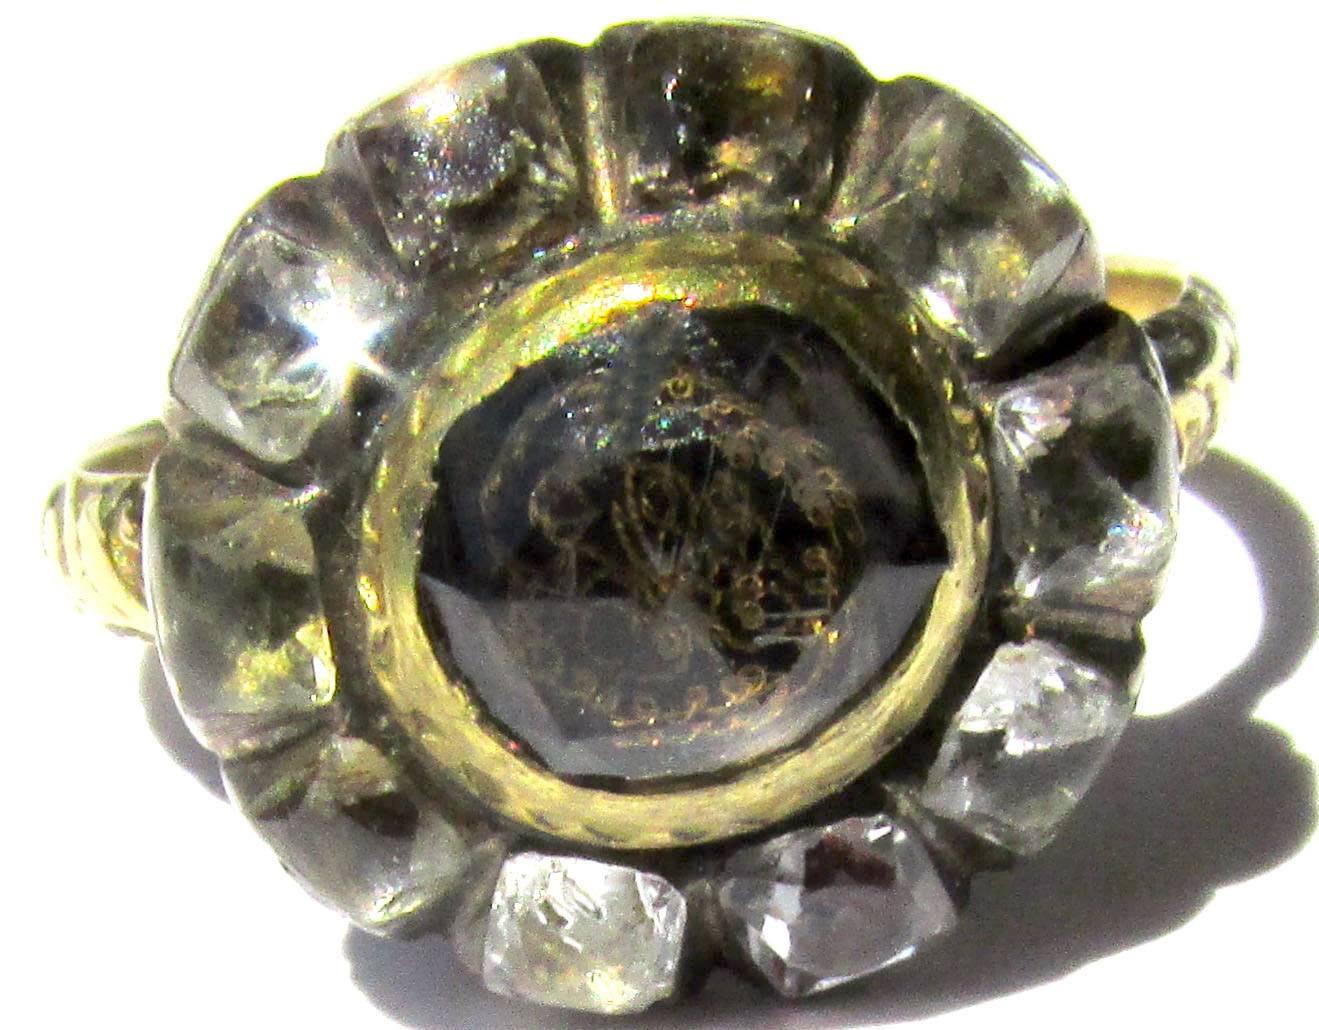 Seventeenth century Stuart crystal cluster ring surrounded by ten paste stones set in 18K gold and silver with embossed shoulders on the shank. The center carved rock crystal is mounted over a gold wire cipher placed on woven hair.
These rings were